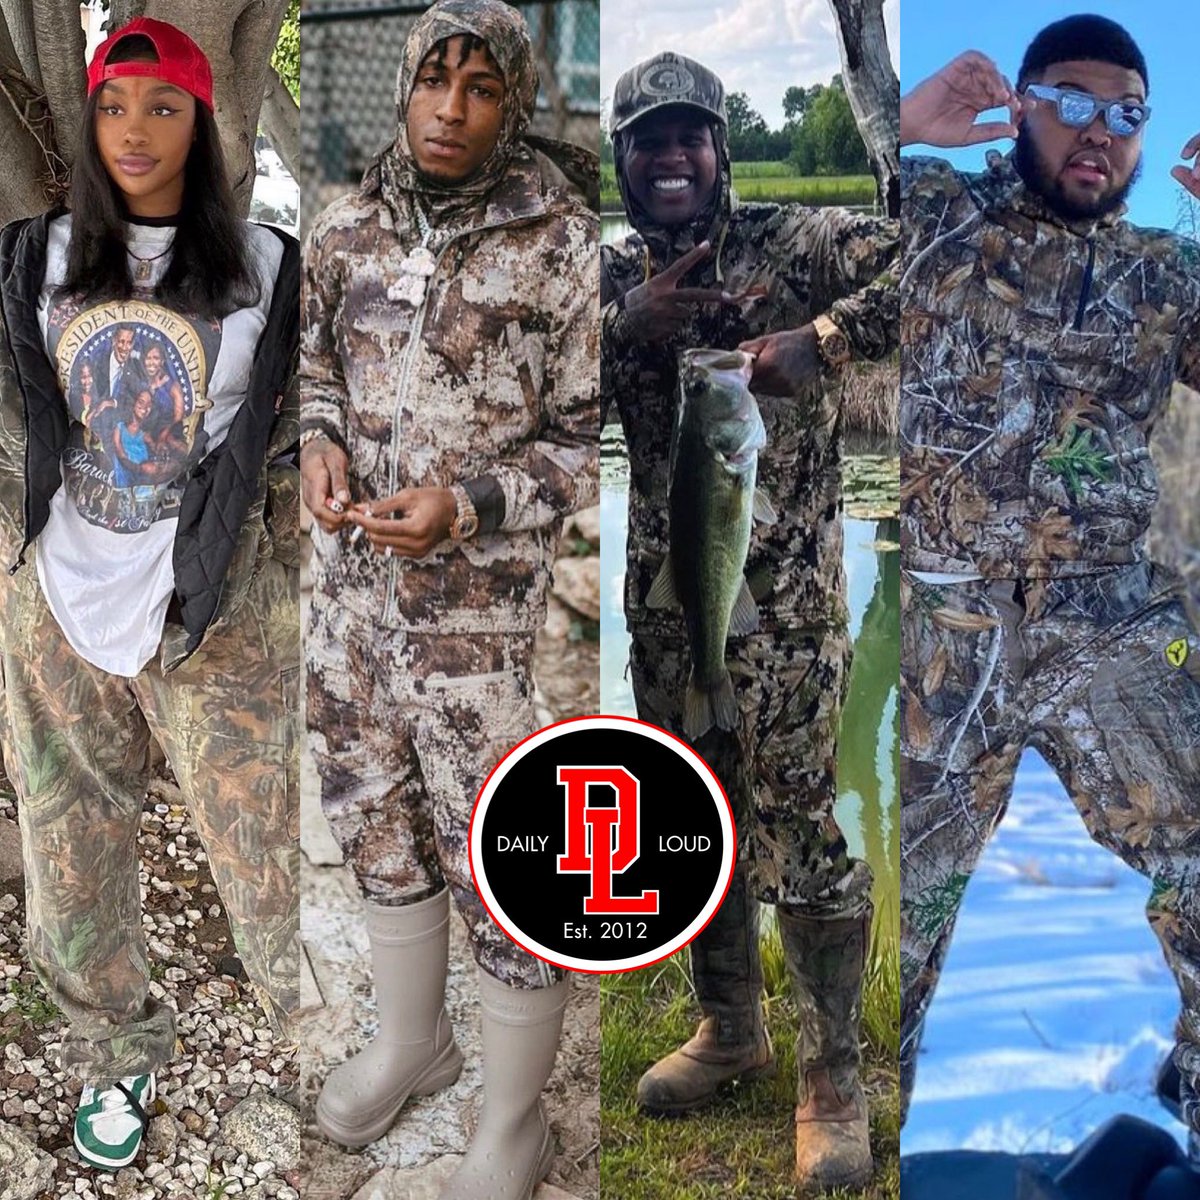 Some fans are claiming NBA YoungBoy brought back the “Camouflage” trend and made it popular again 👀🤔